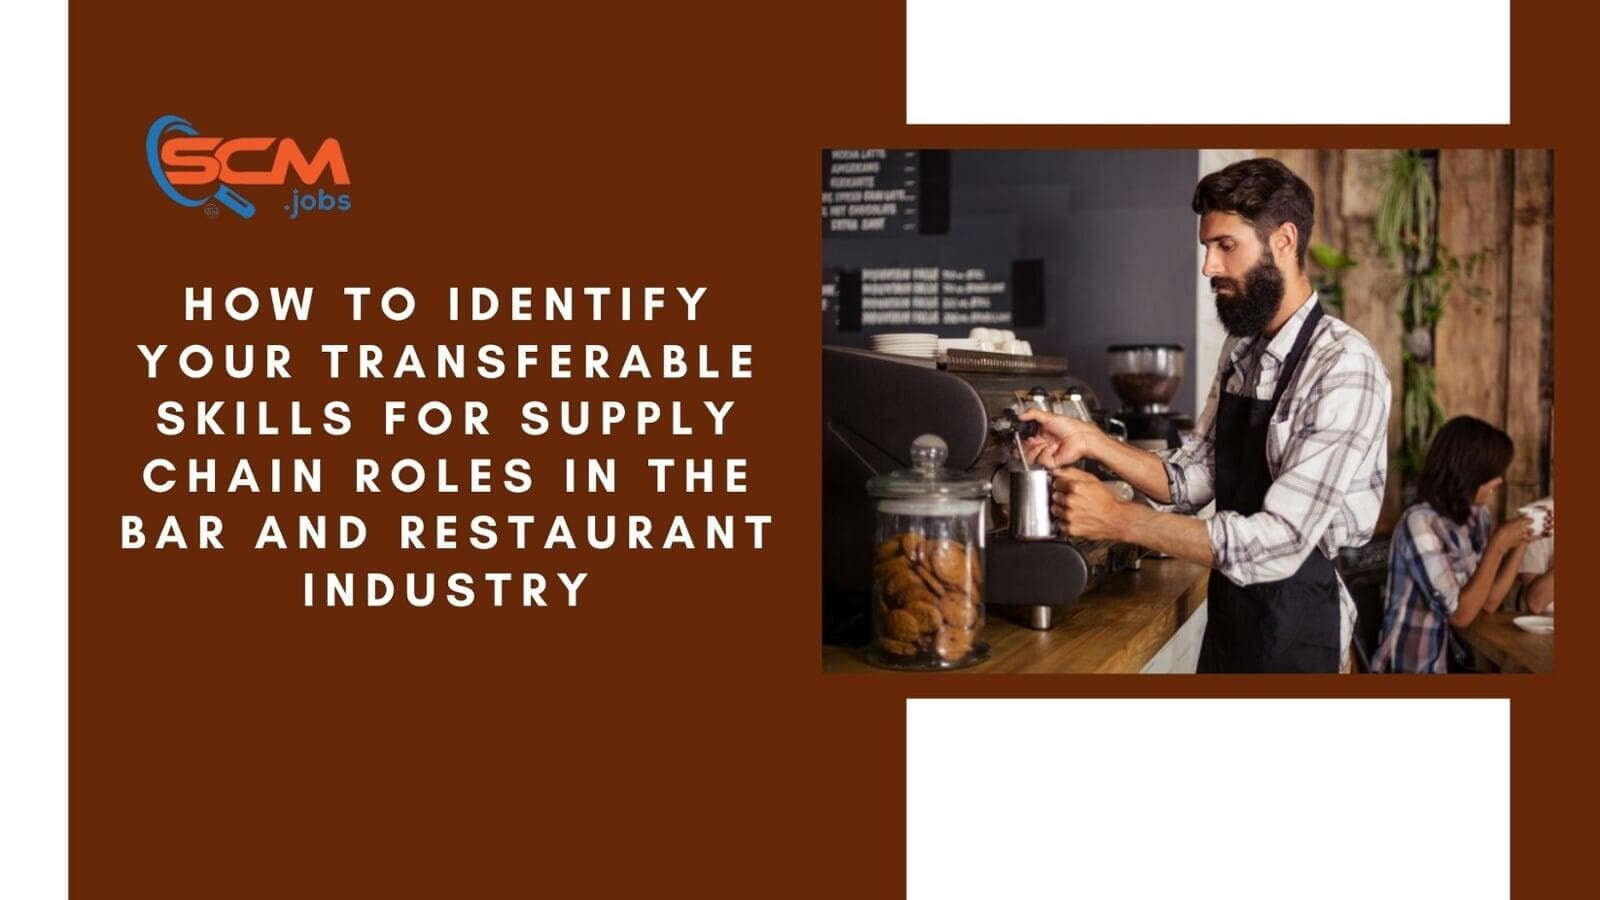 How to Identify Your Transferable Skills for Supply Chain Roles in the Bar and Restaurant Industry